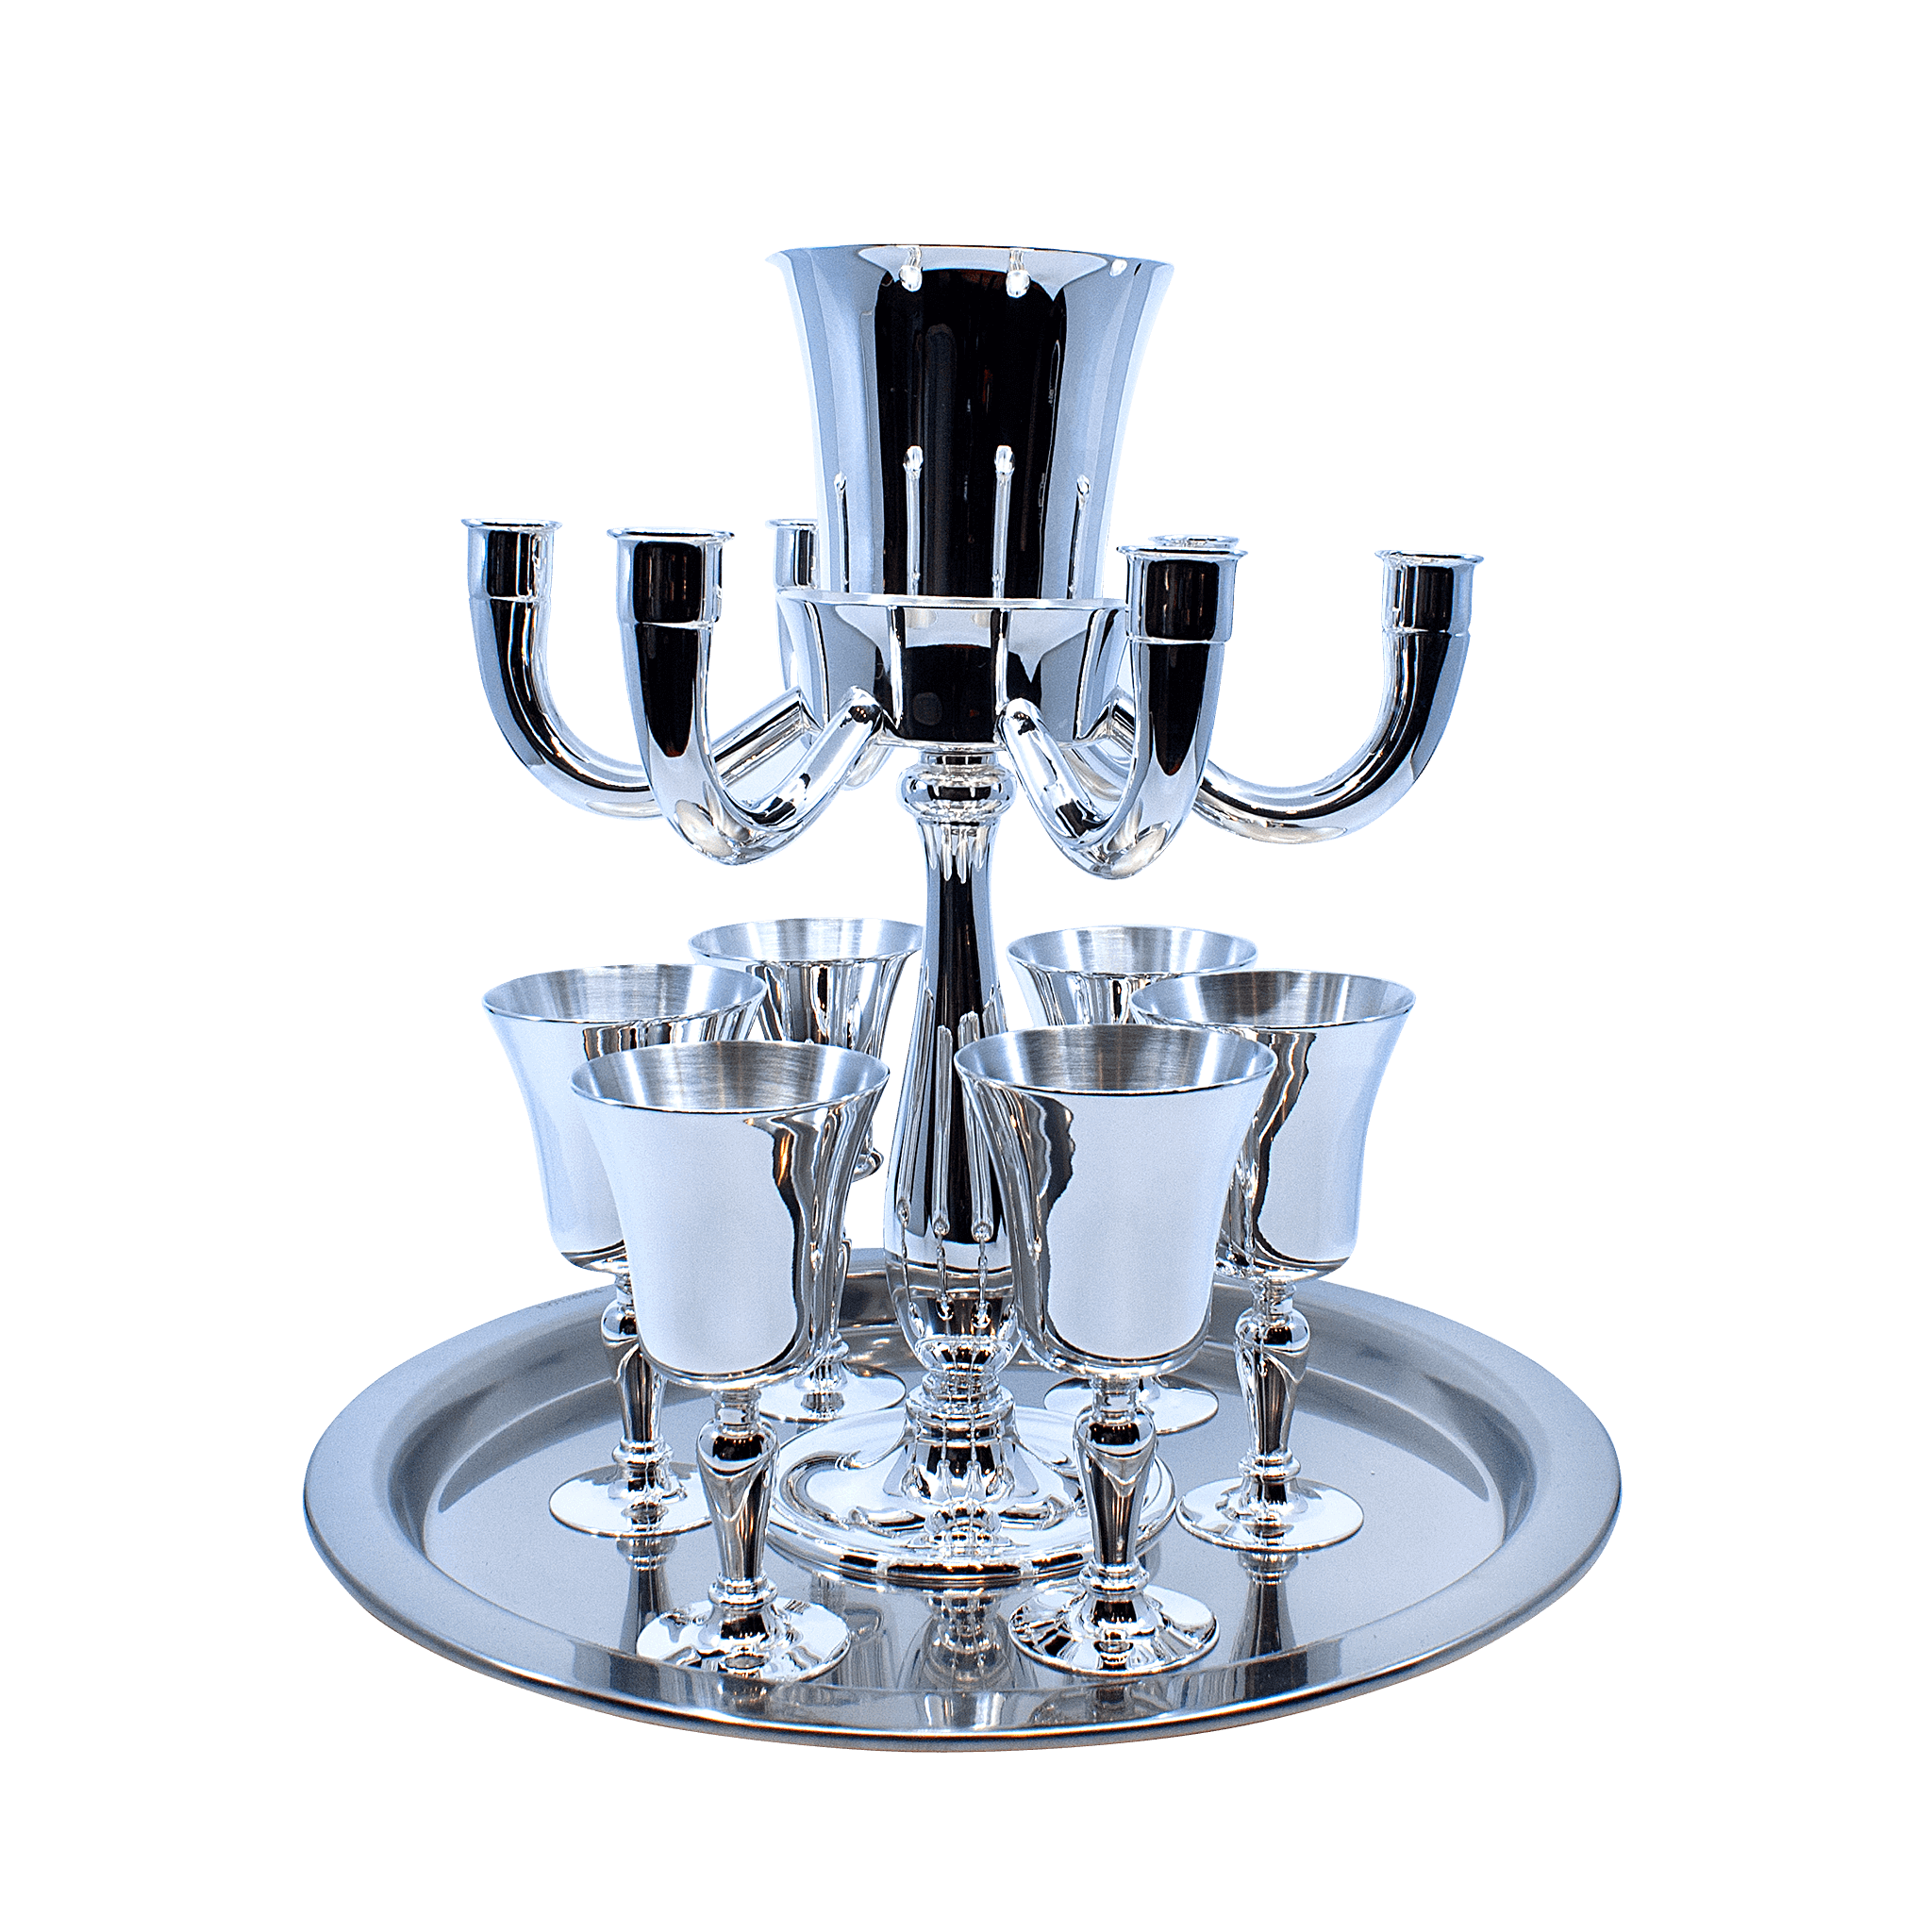 A Kiddush Fountain of Wine and Shabbat Candlesticks.A - Piece By Zion Hadad